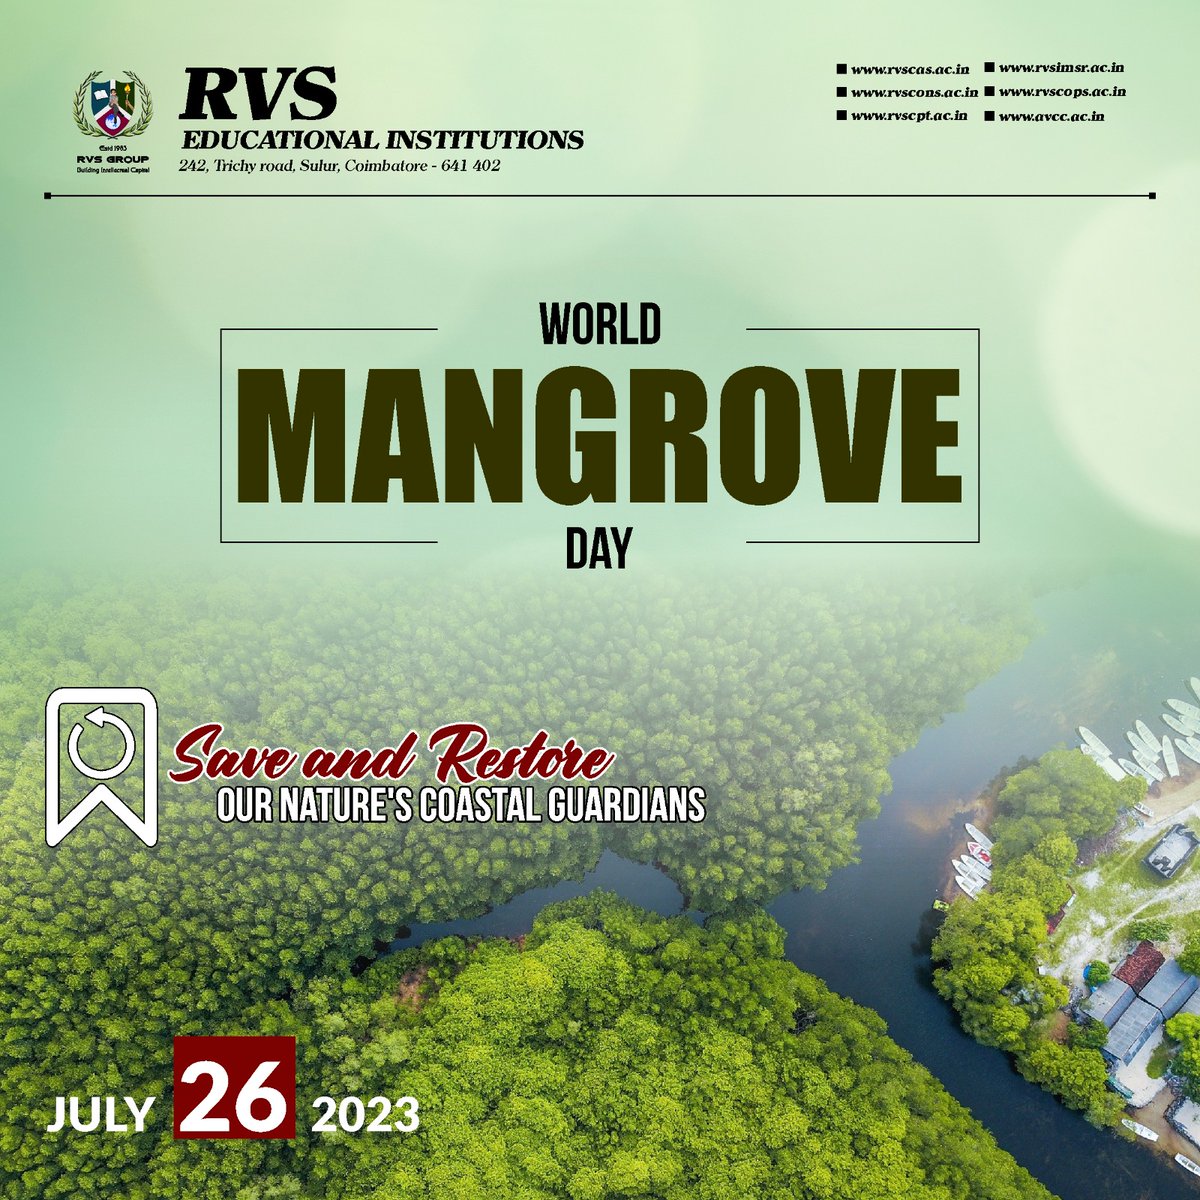 🌊 Celebrating World Mangrove Day 🌿 Let's unite to save and restore these precious ecosystems for a greener, sustainable future! 🌎🌱
#rvsimsrsulur #rvssiragugal #WorldMangroveDay #MangroveConservation #worldmangroveday2023 #SaveOurMangroves #ProtectMangroves #MangroveEcosystem